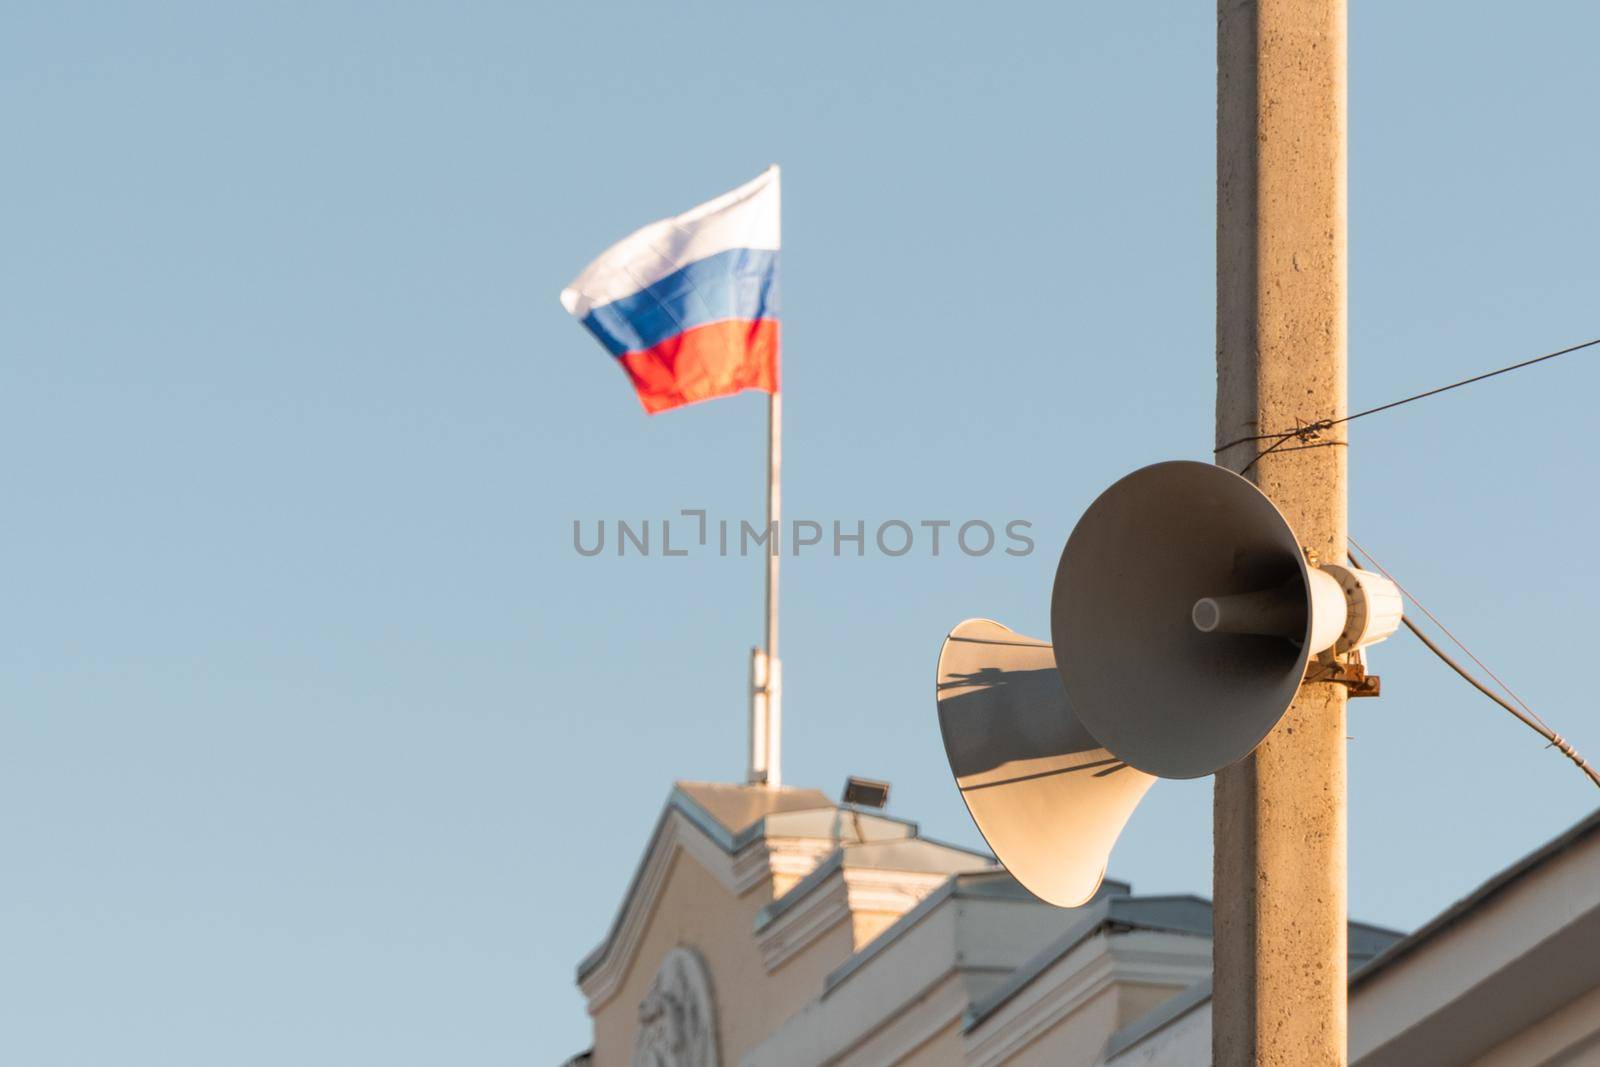 loudspeakers on the electrification pole. in the background, the Russian flag is flying on the administrative building by olex